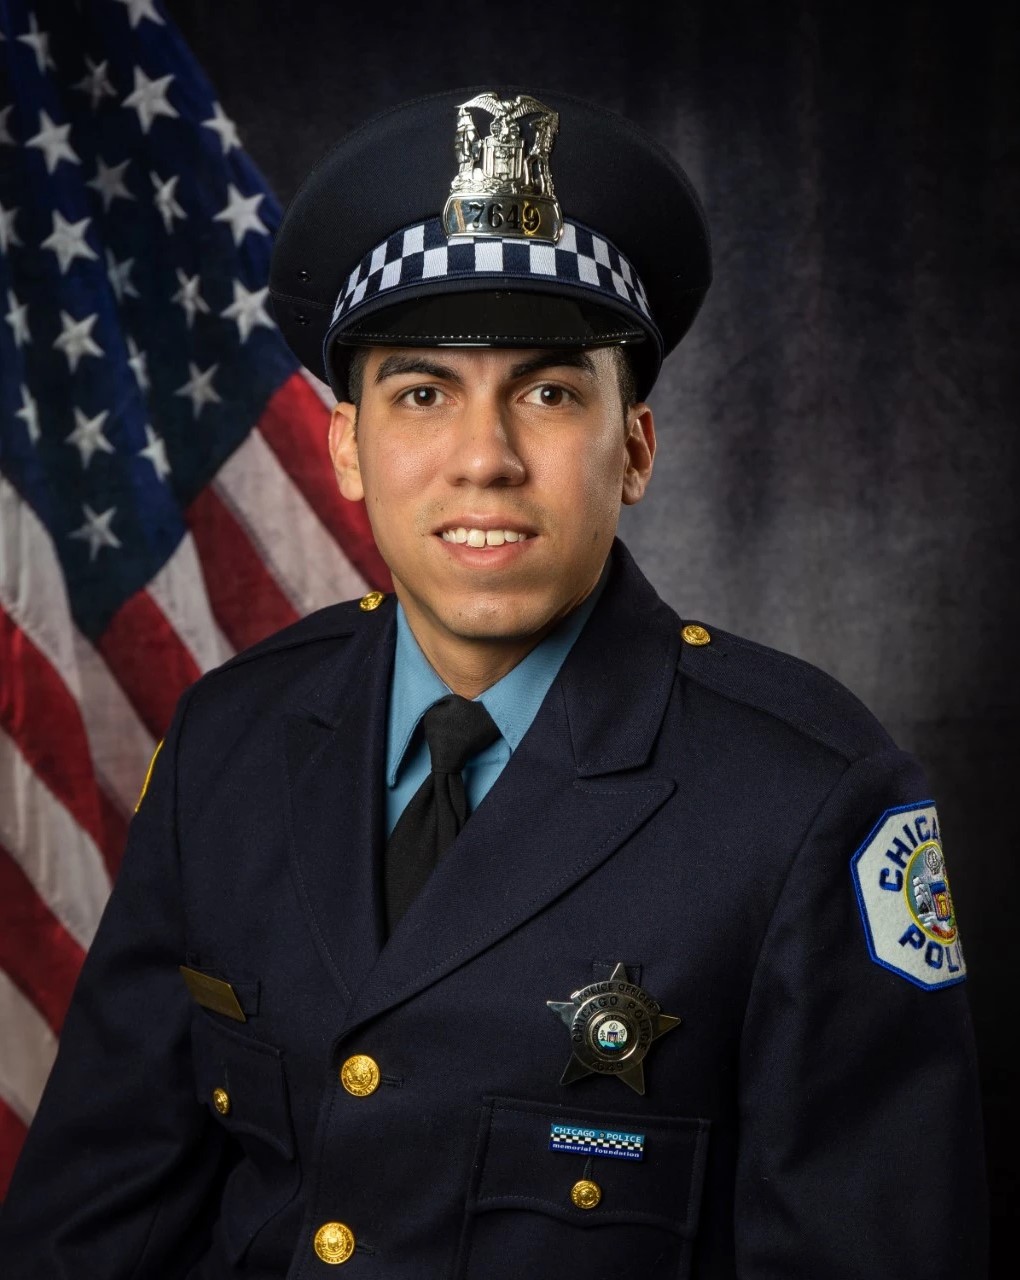 Police Officer Andres M. Vasquez Lasso | Chicago Police Department, Illinois